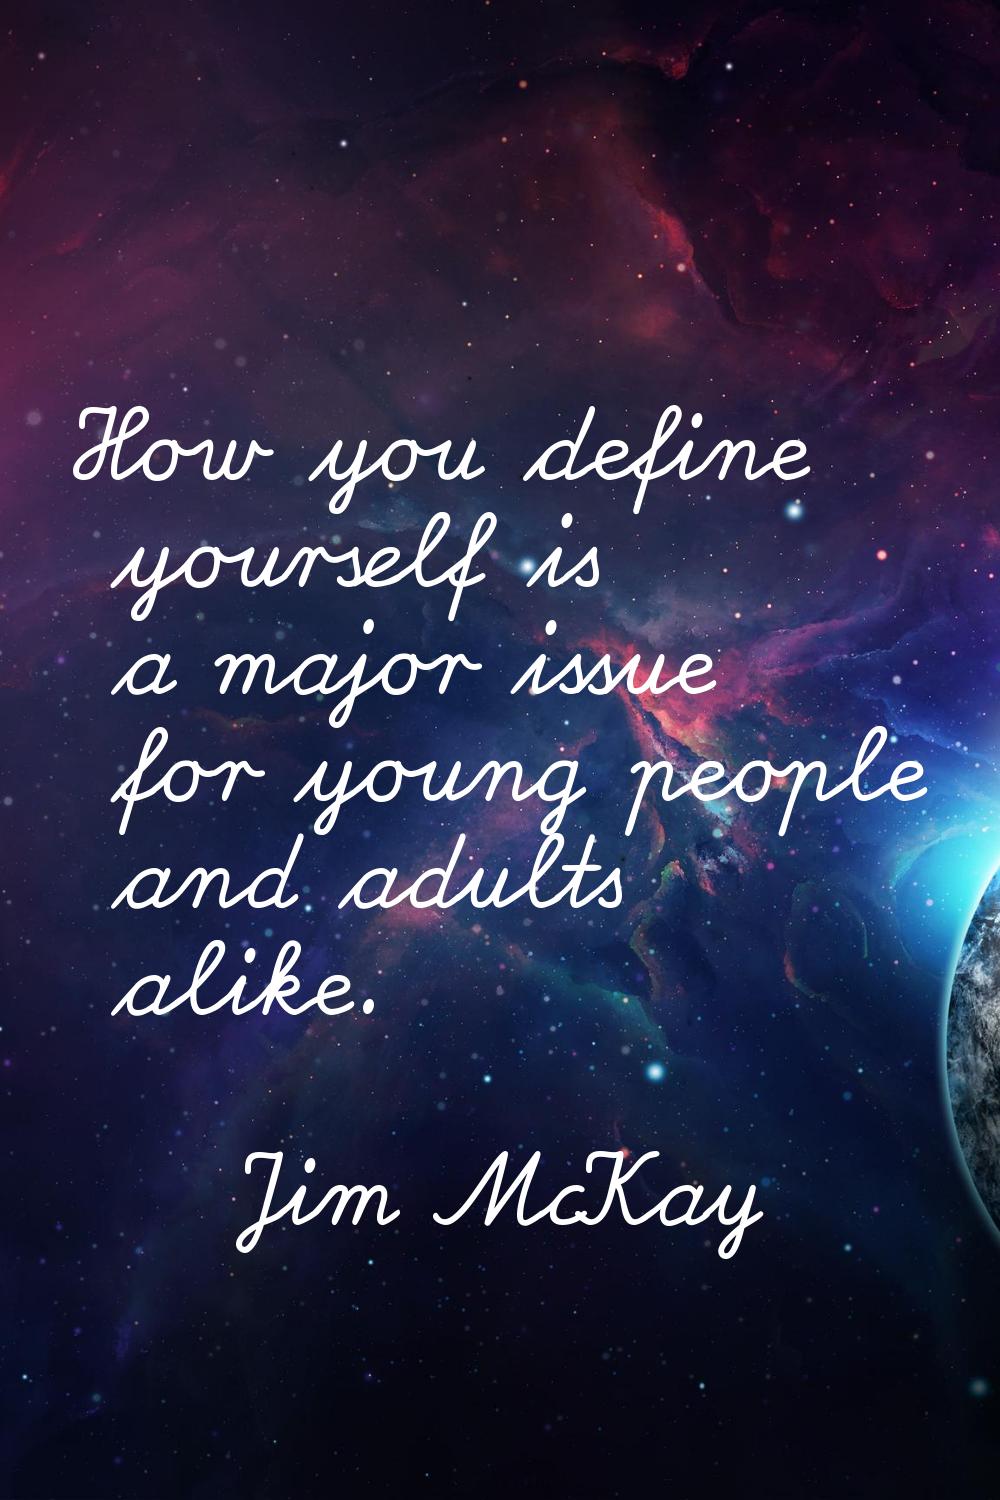 How you define yourself is a major issue for young people and adults alike.